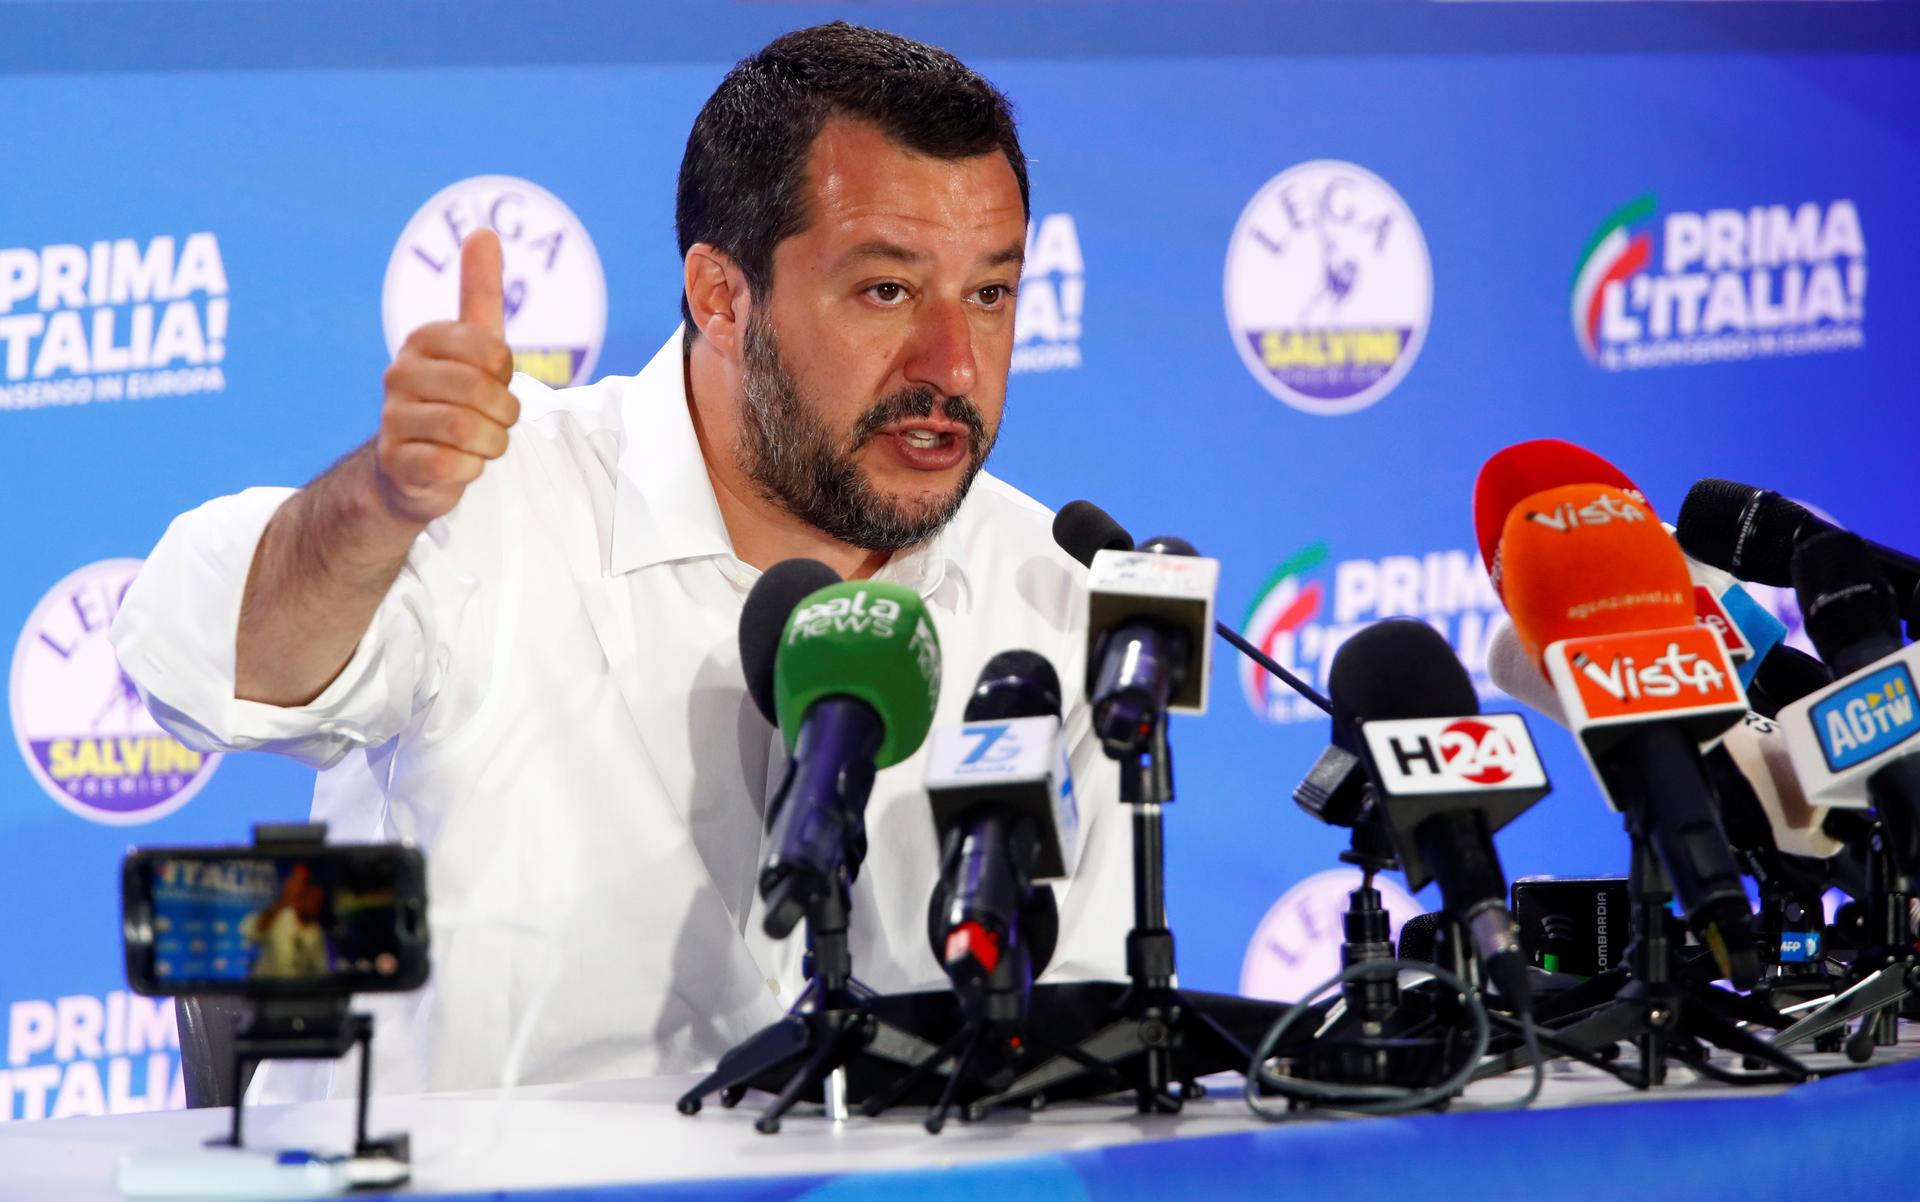 Deputy Prime Minister and League party leader Matteo Salvini speaks to the media at the League party headquarters, following the results of the European Parliament elections, in Milan, Italy, May 27, 2019.